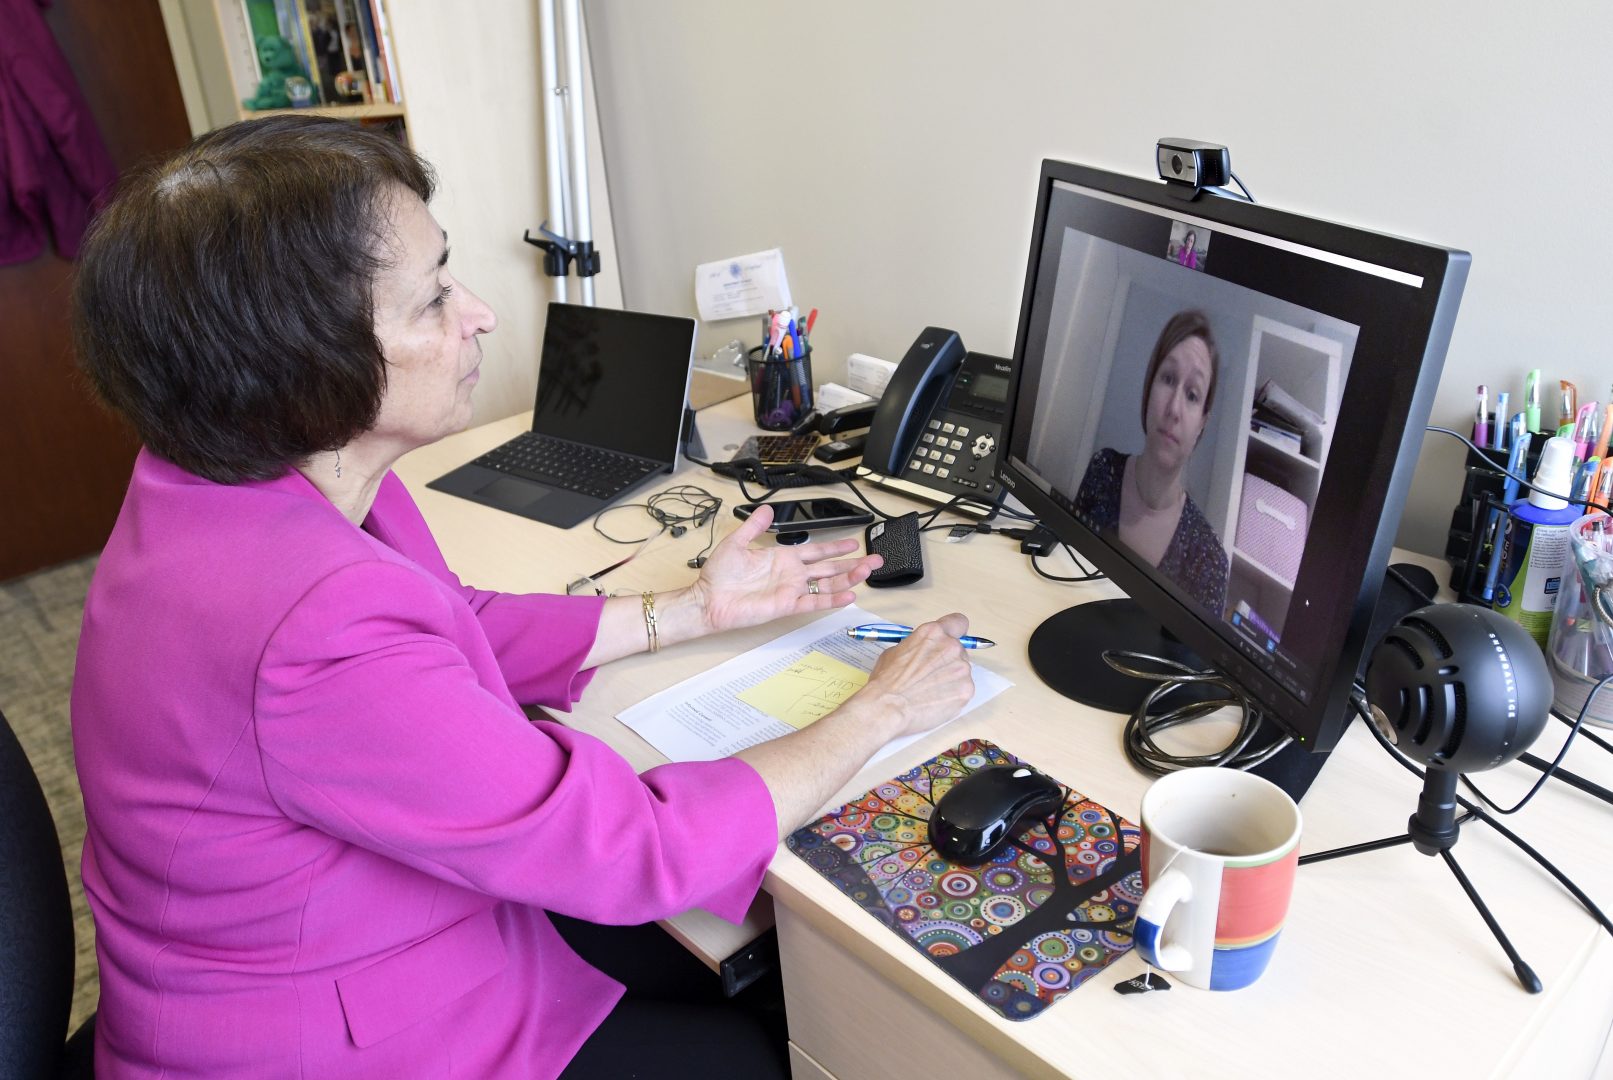 Psychologist Mary Alvord, left, holds a video conference with her colleague, psychologist Veronica Raggi, whom she had scheduled to meet in person, in Chevy Chase, Md., Wednesday, March 18, 2020. For people with anxiety disorders, the coronavirus outbreak presents a new set of worries to deal with, psychologists say.